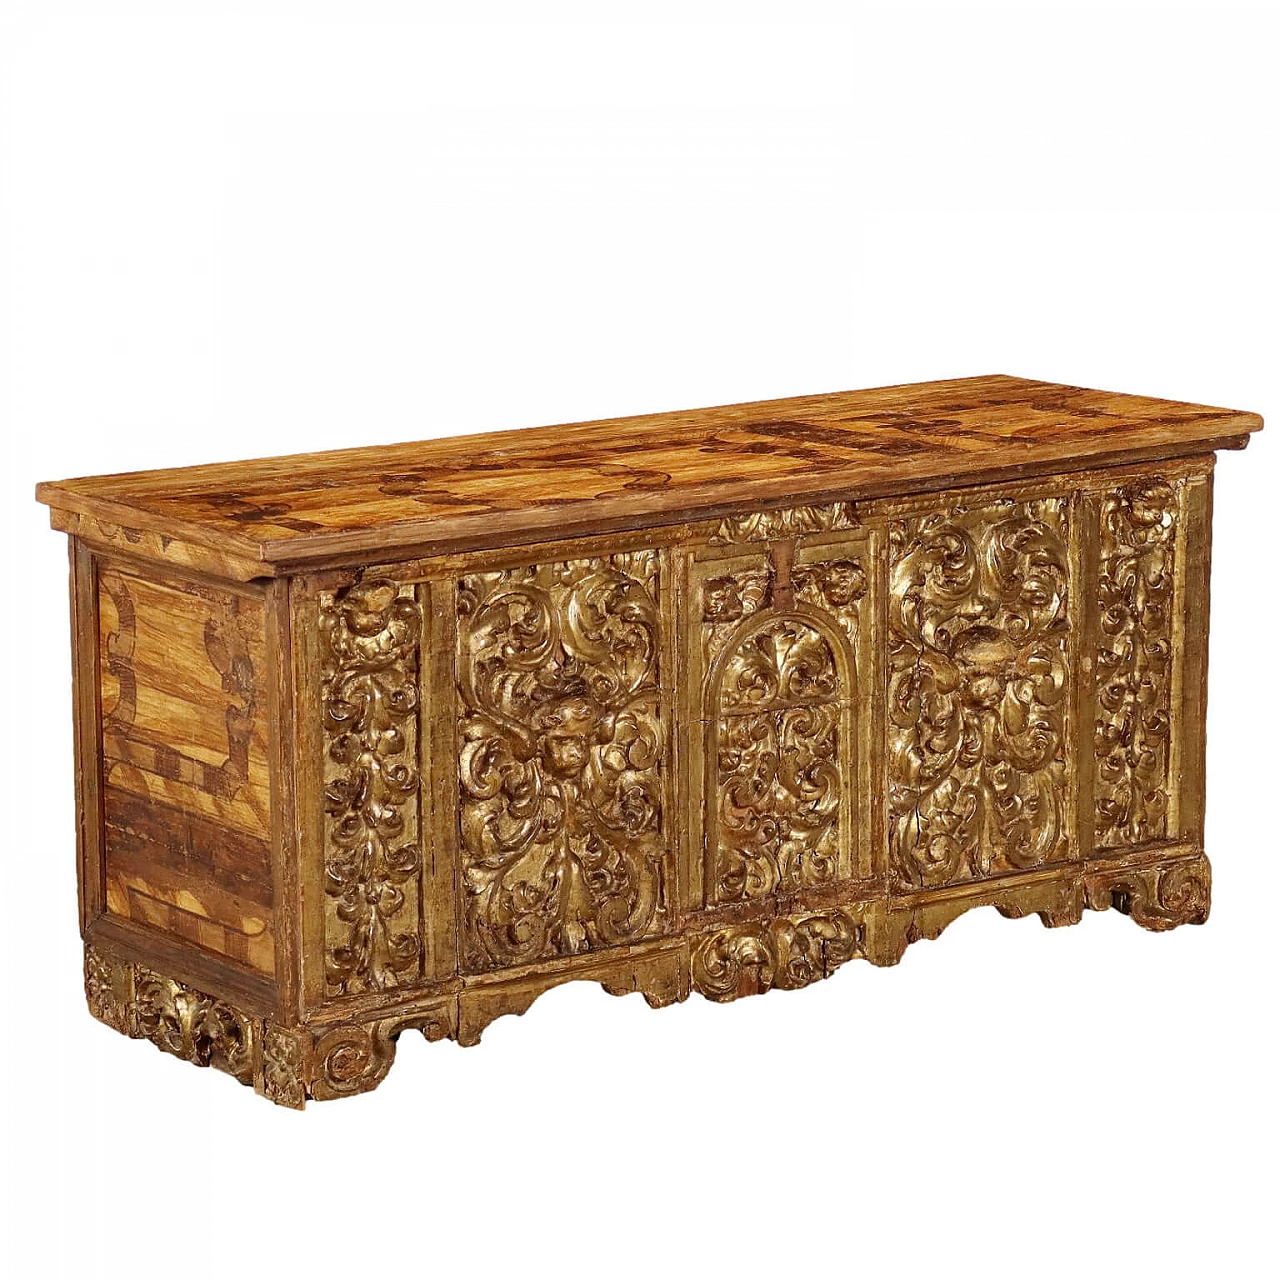 Carved and gilded wooden chest, 17th century 1